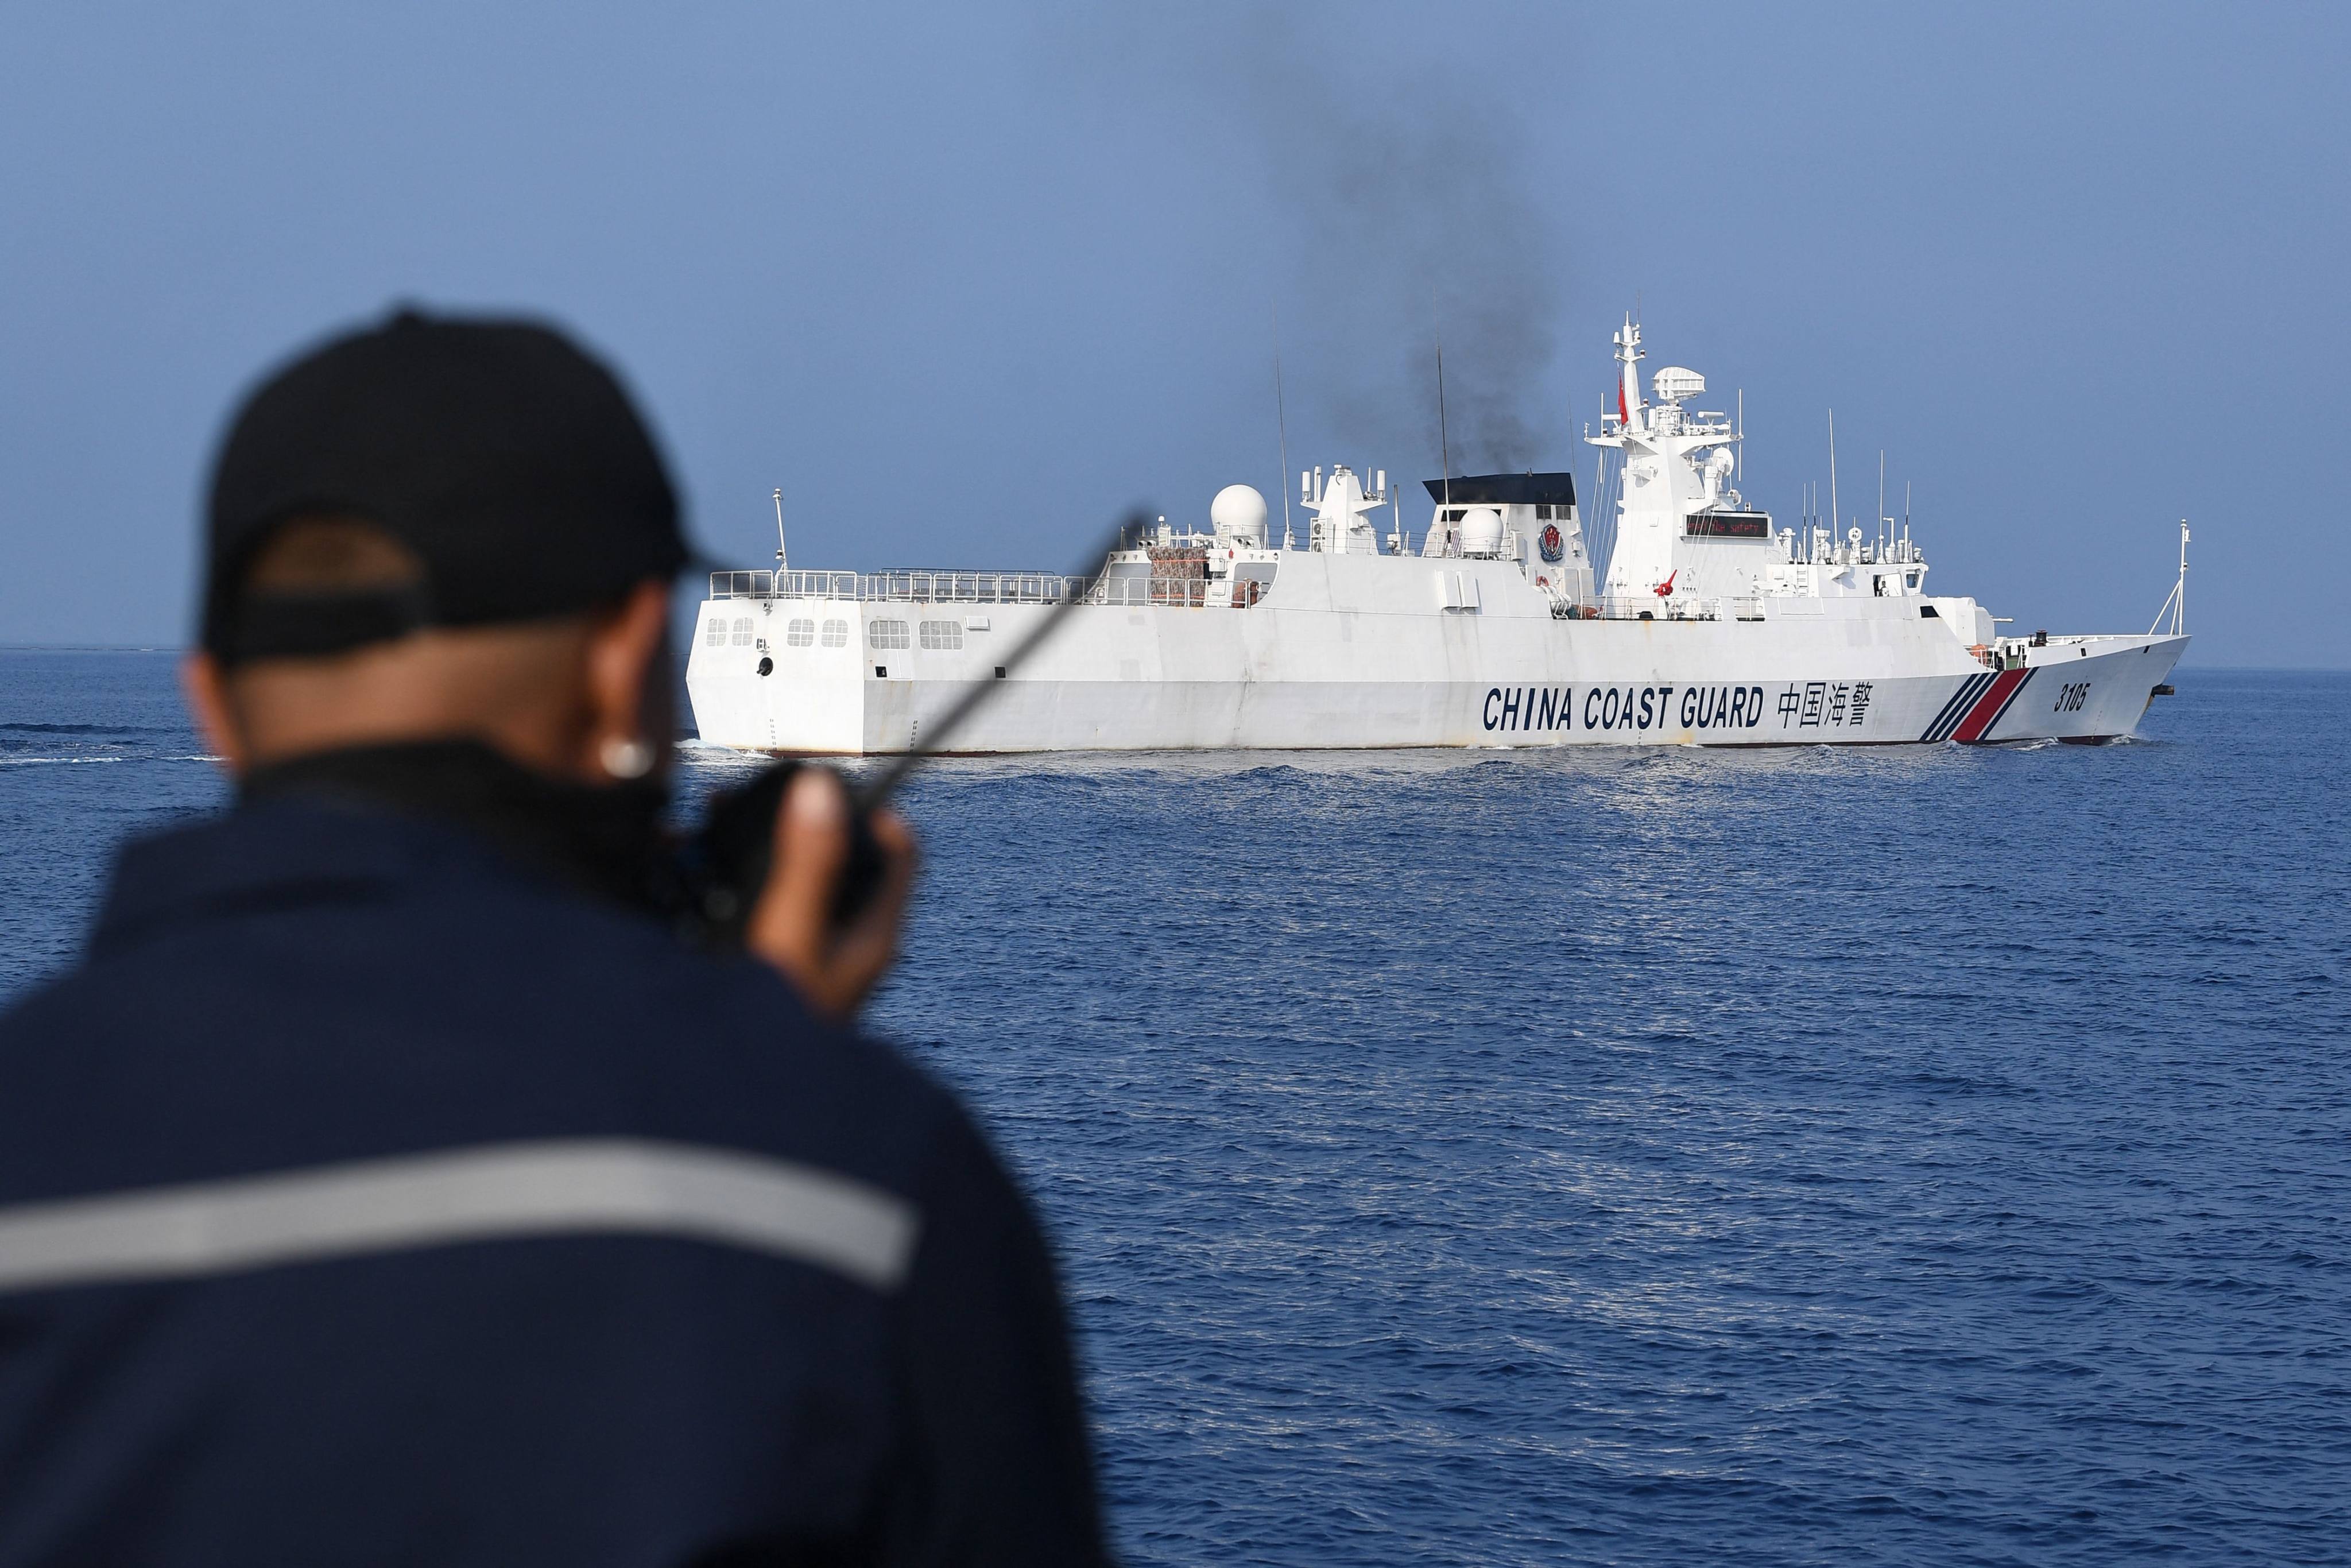 A crew member of the Philippine Bureau of Fisheries and Aquatic Resources ship Datu Bankaw monitors a Chinese coastguard vessel near Scarborough Shoal in the South China Sea this month. Photo: AFP